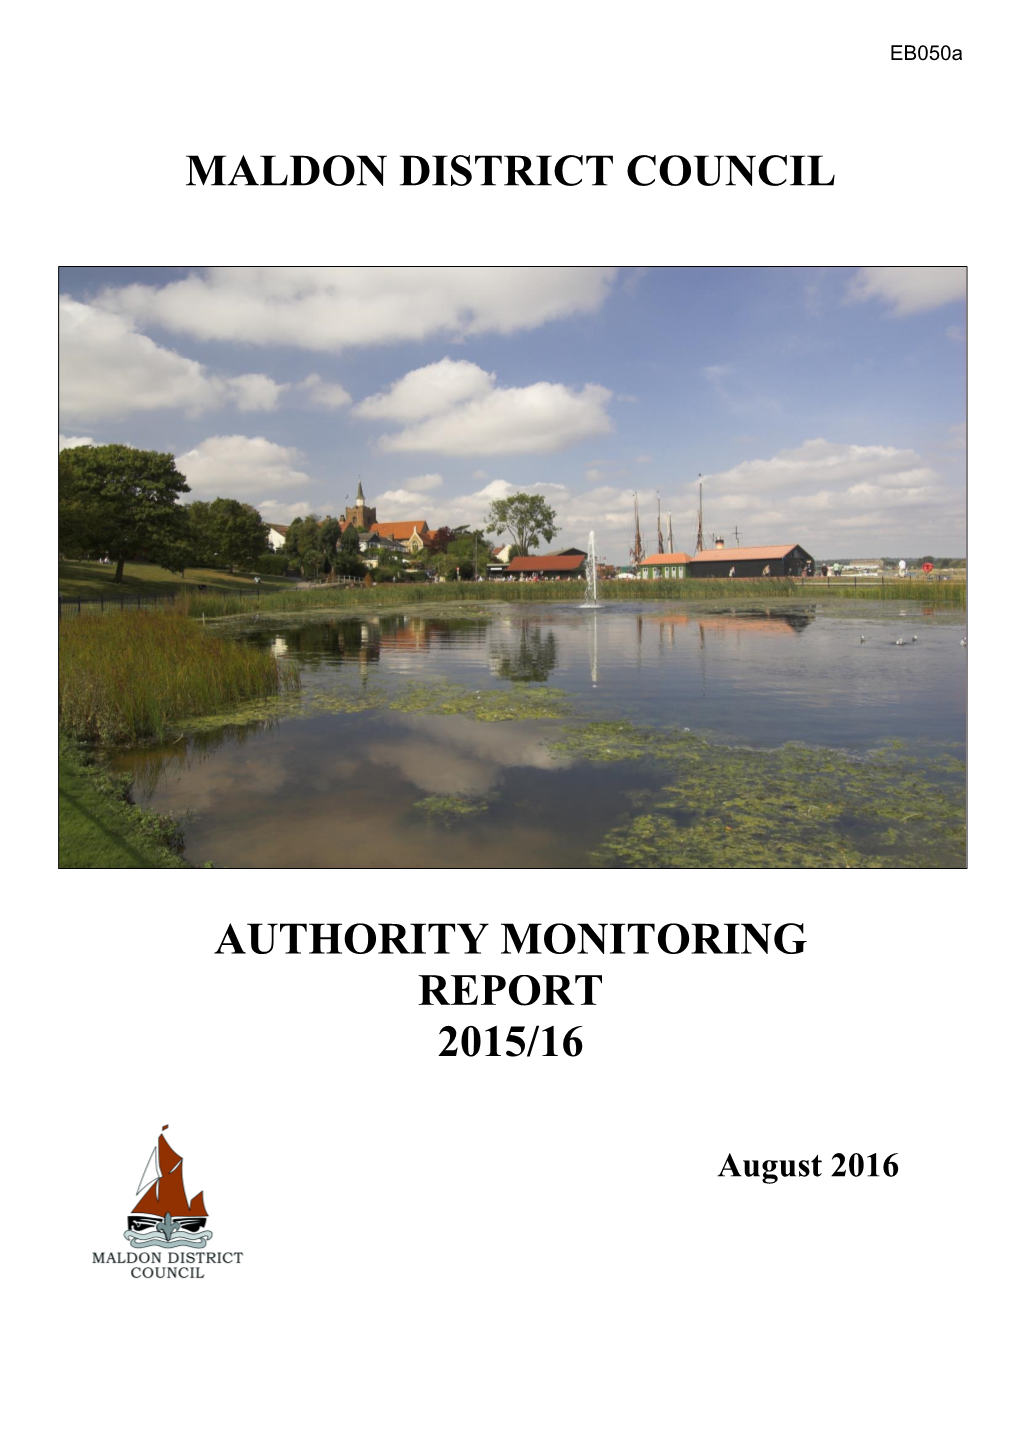 Maldon District Council Authority Monitoring Report 2015/16